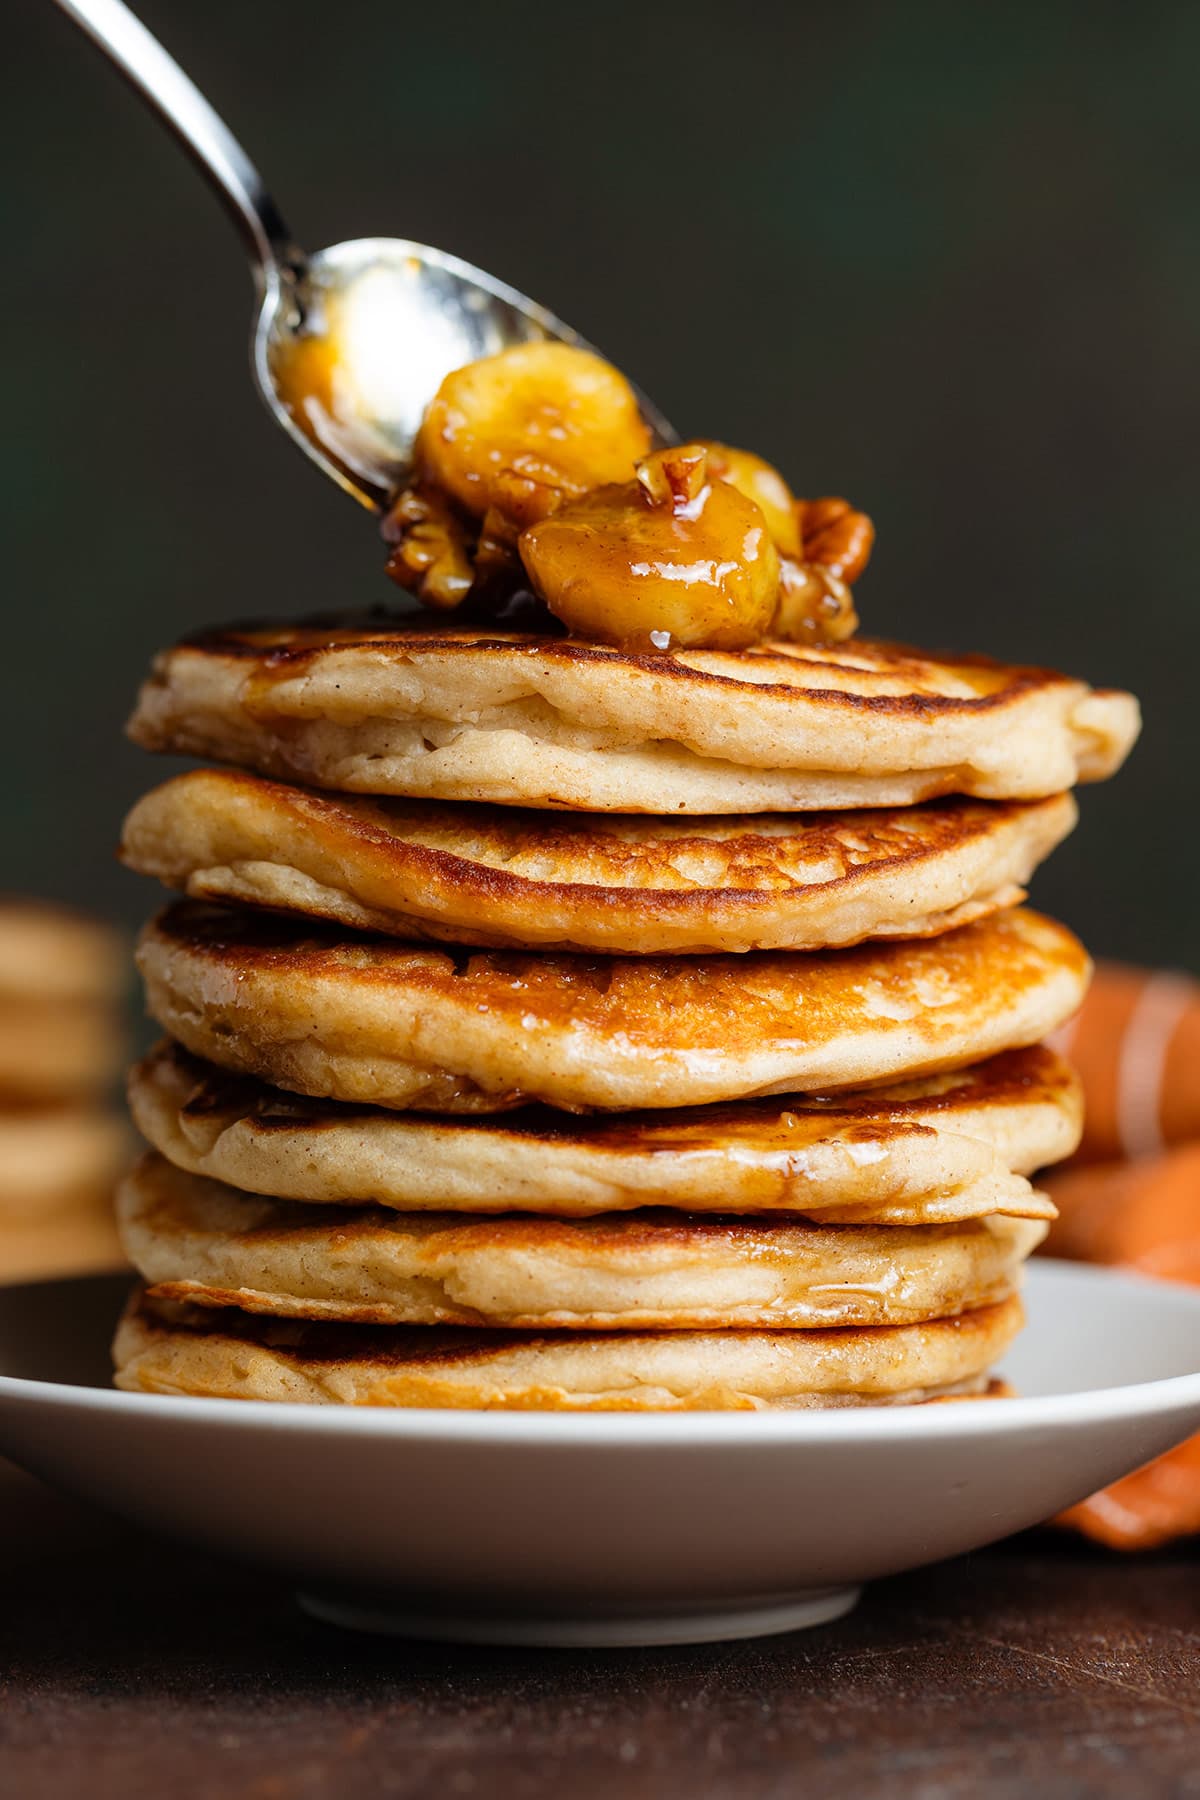 A stack of pancakes being topped with caramelized bananas.